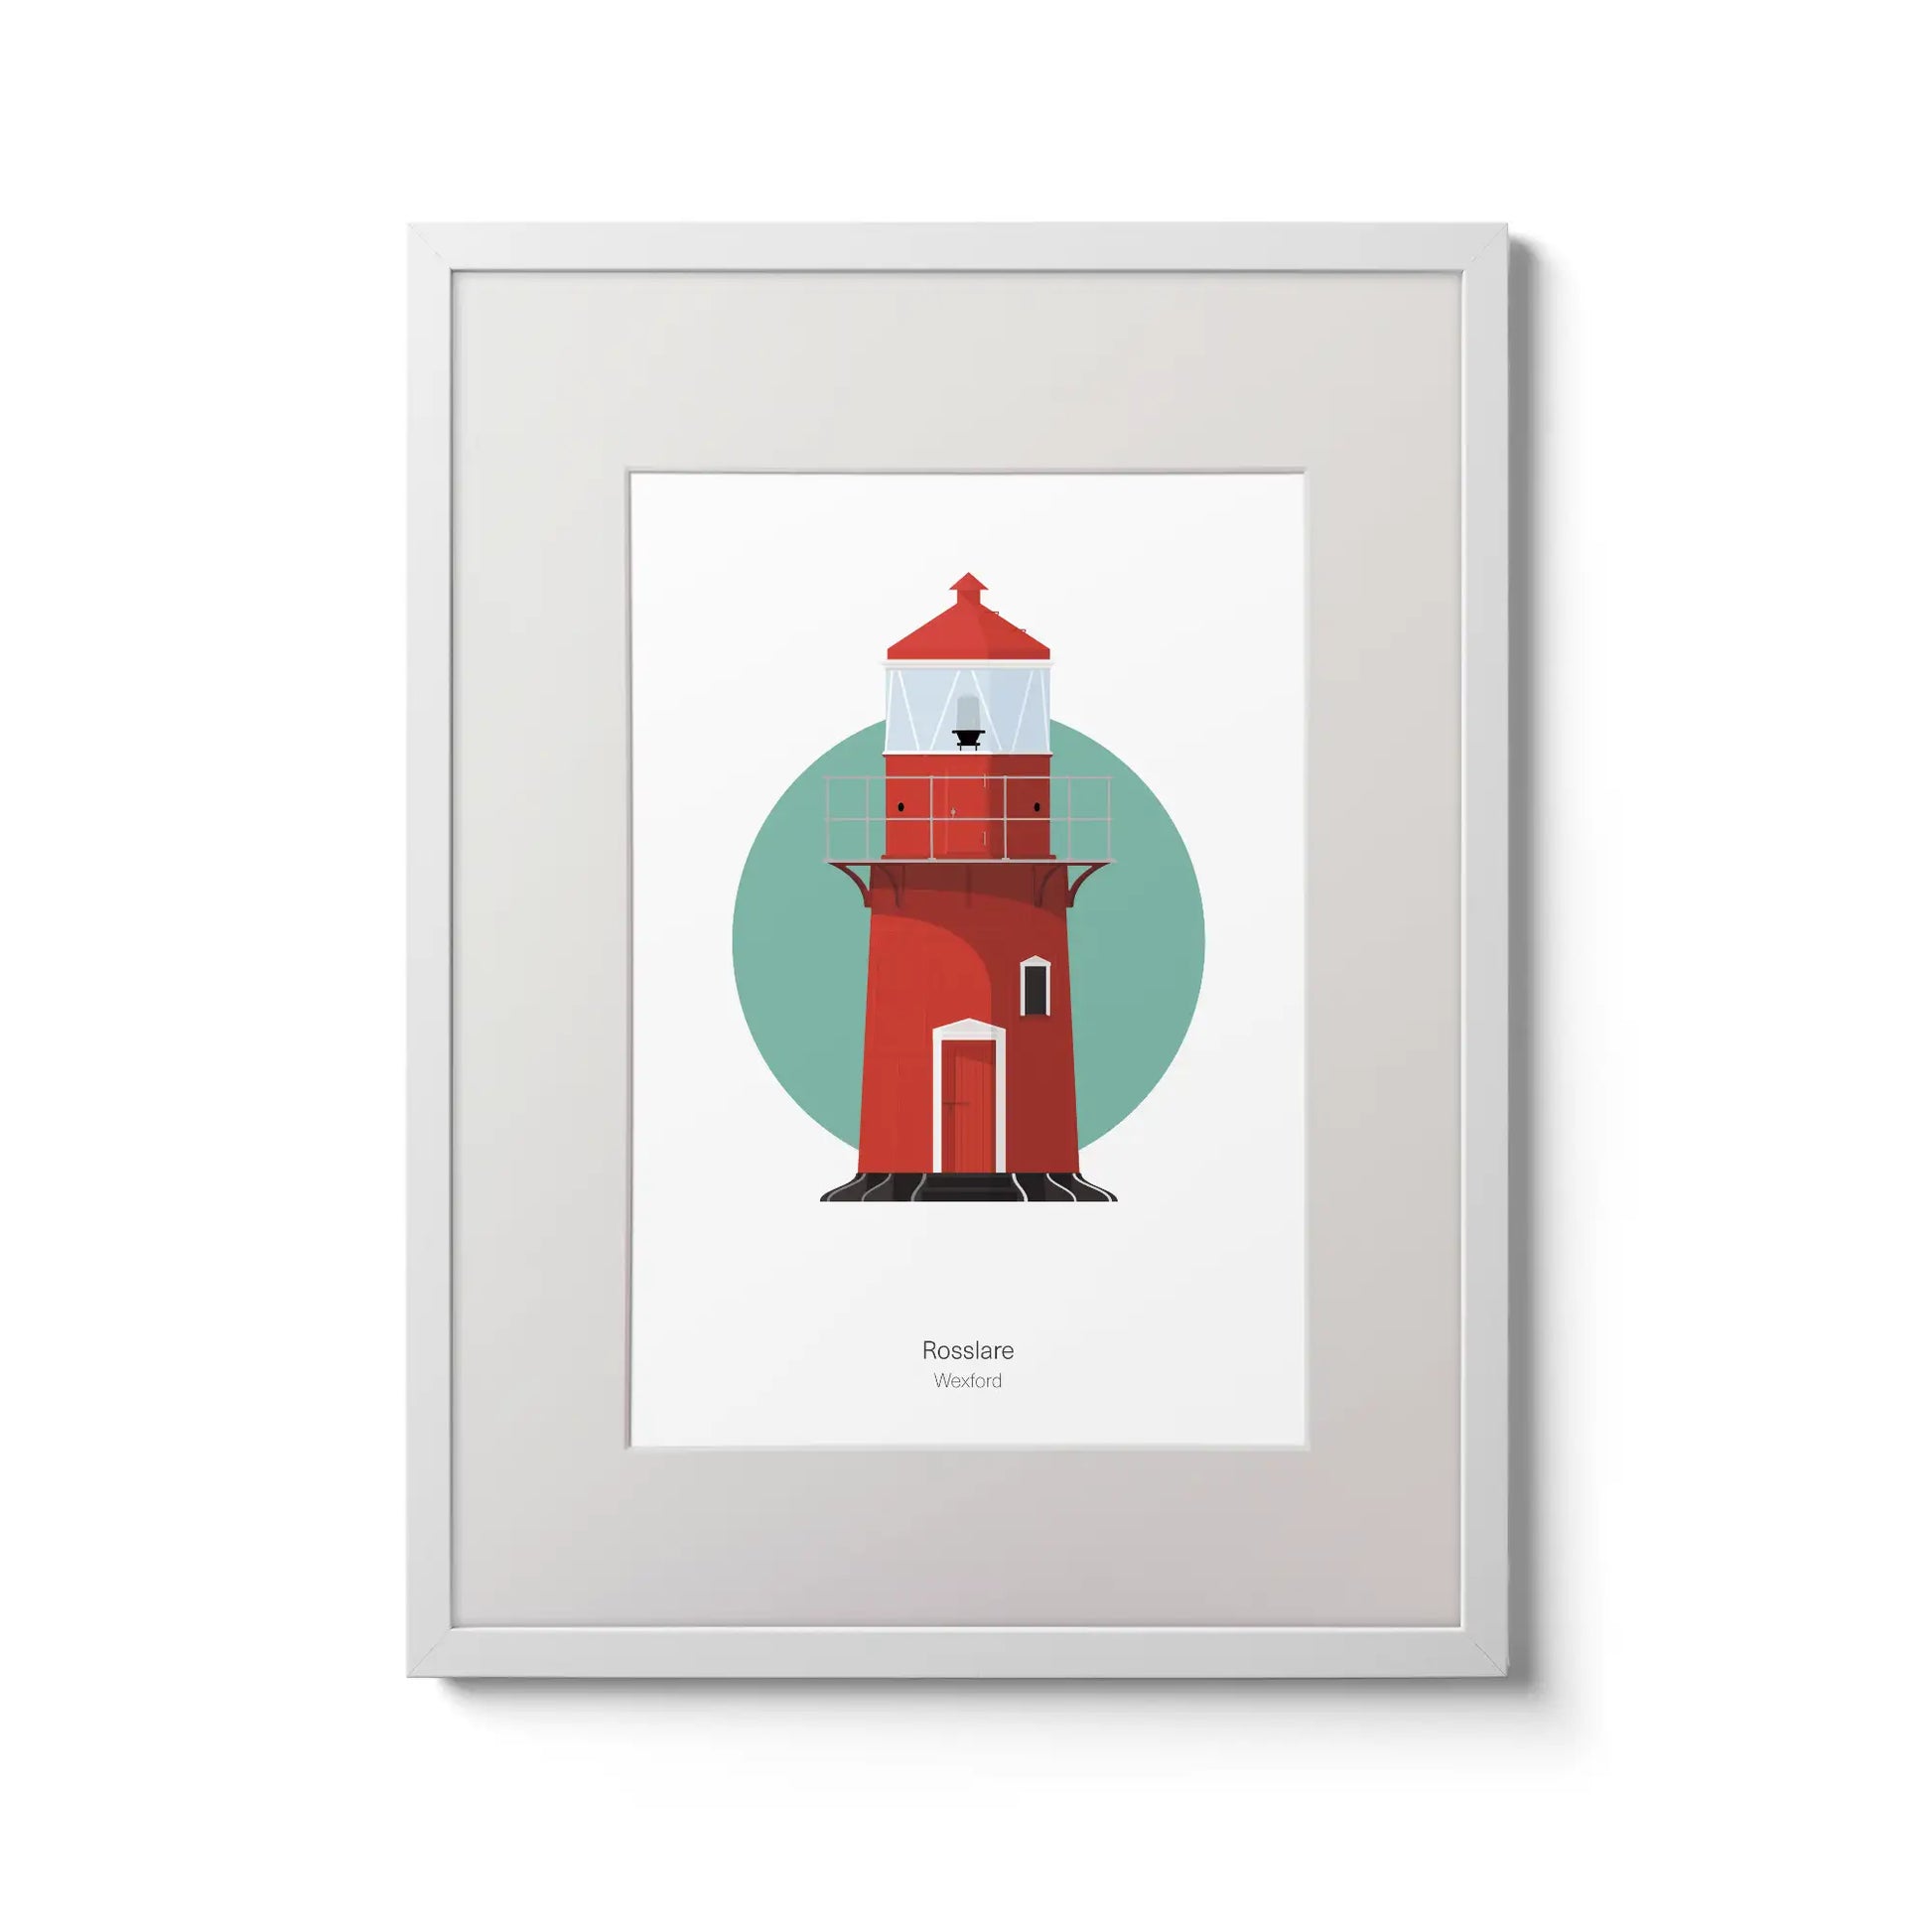 Wall hanging of Rosslare Harbour lighthouse on a white background inside light blue square,  in a white frame measuring 30x40cm.